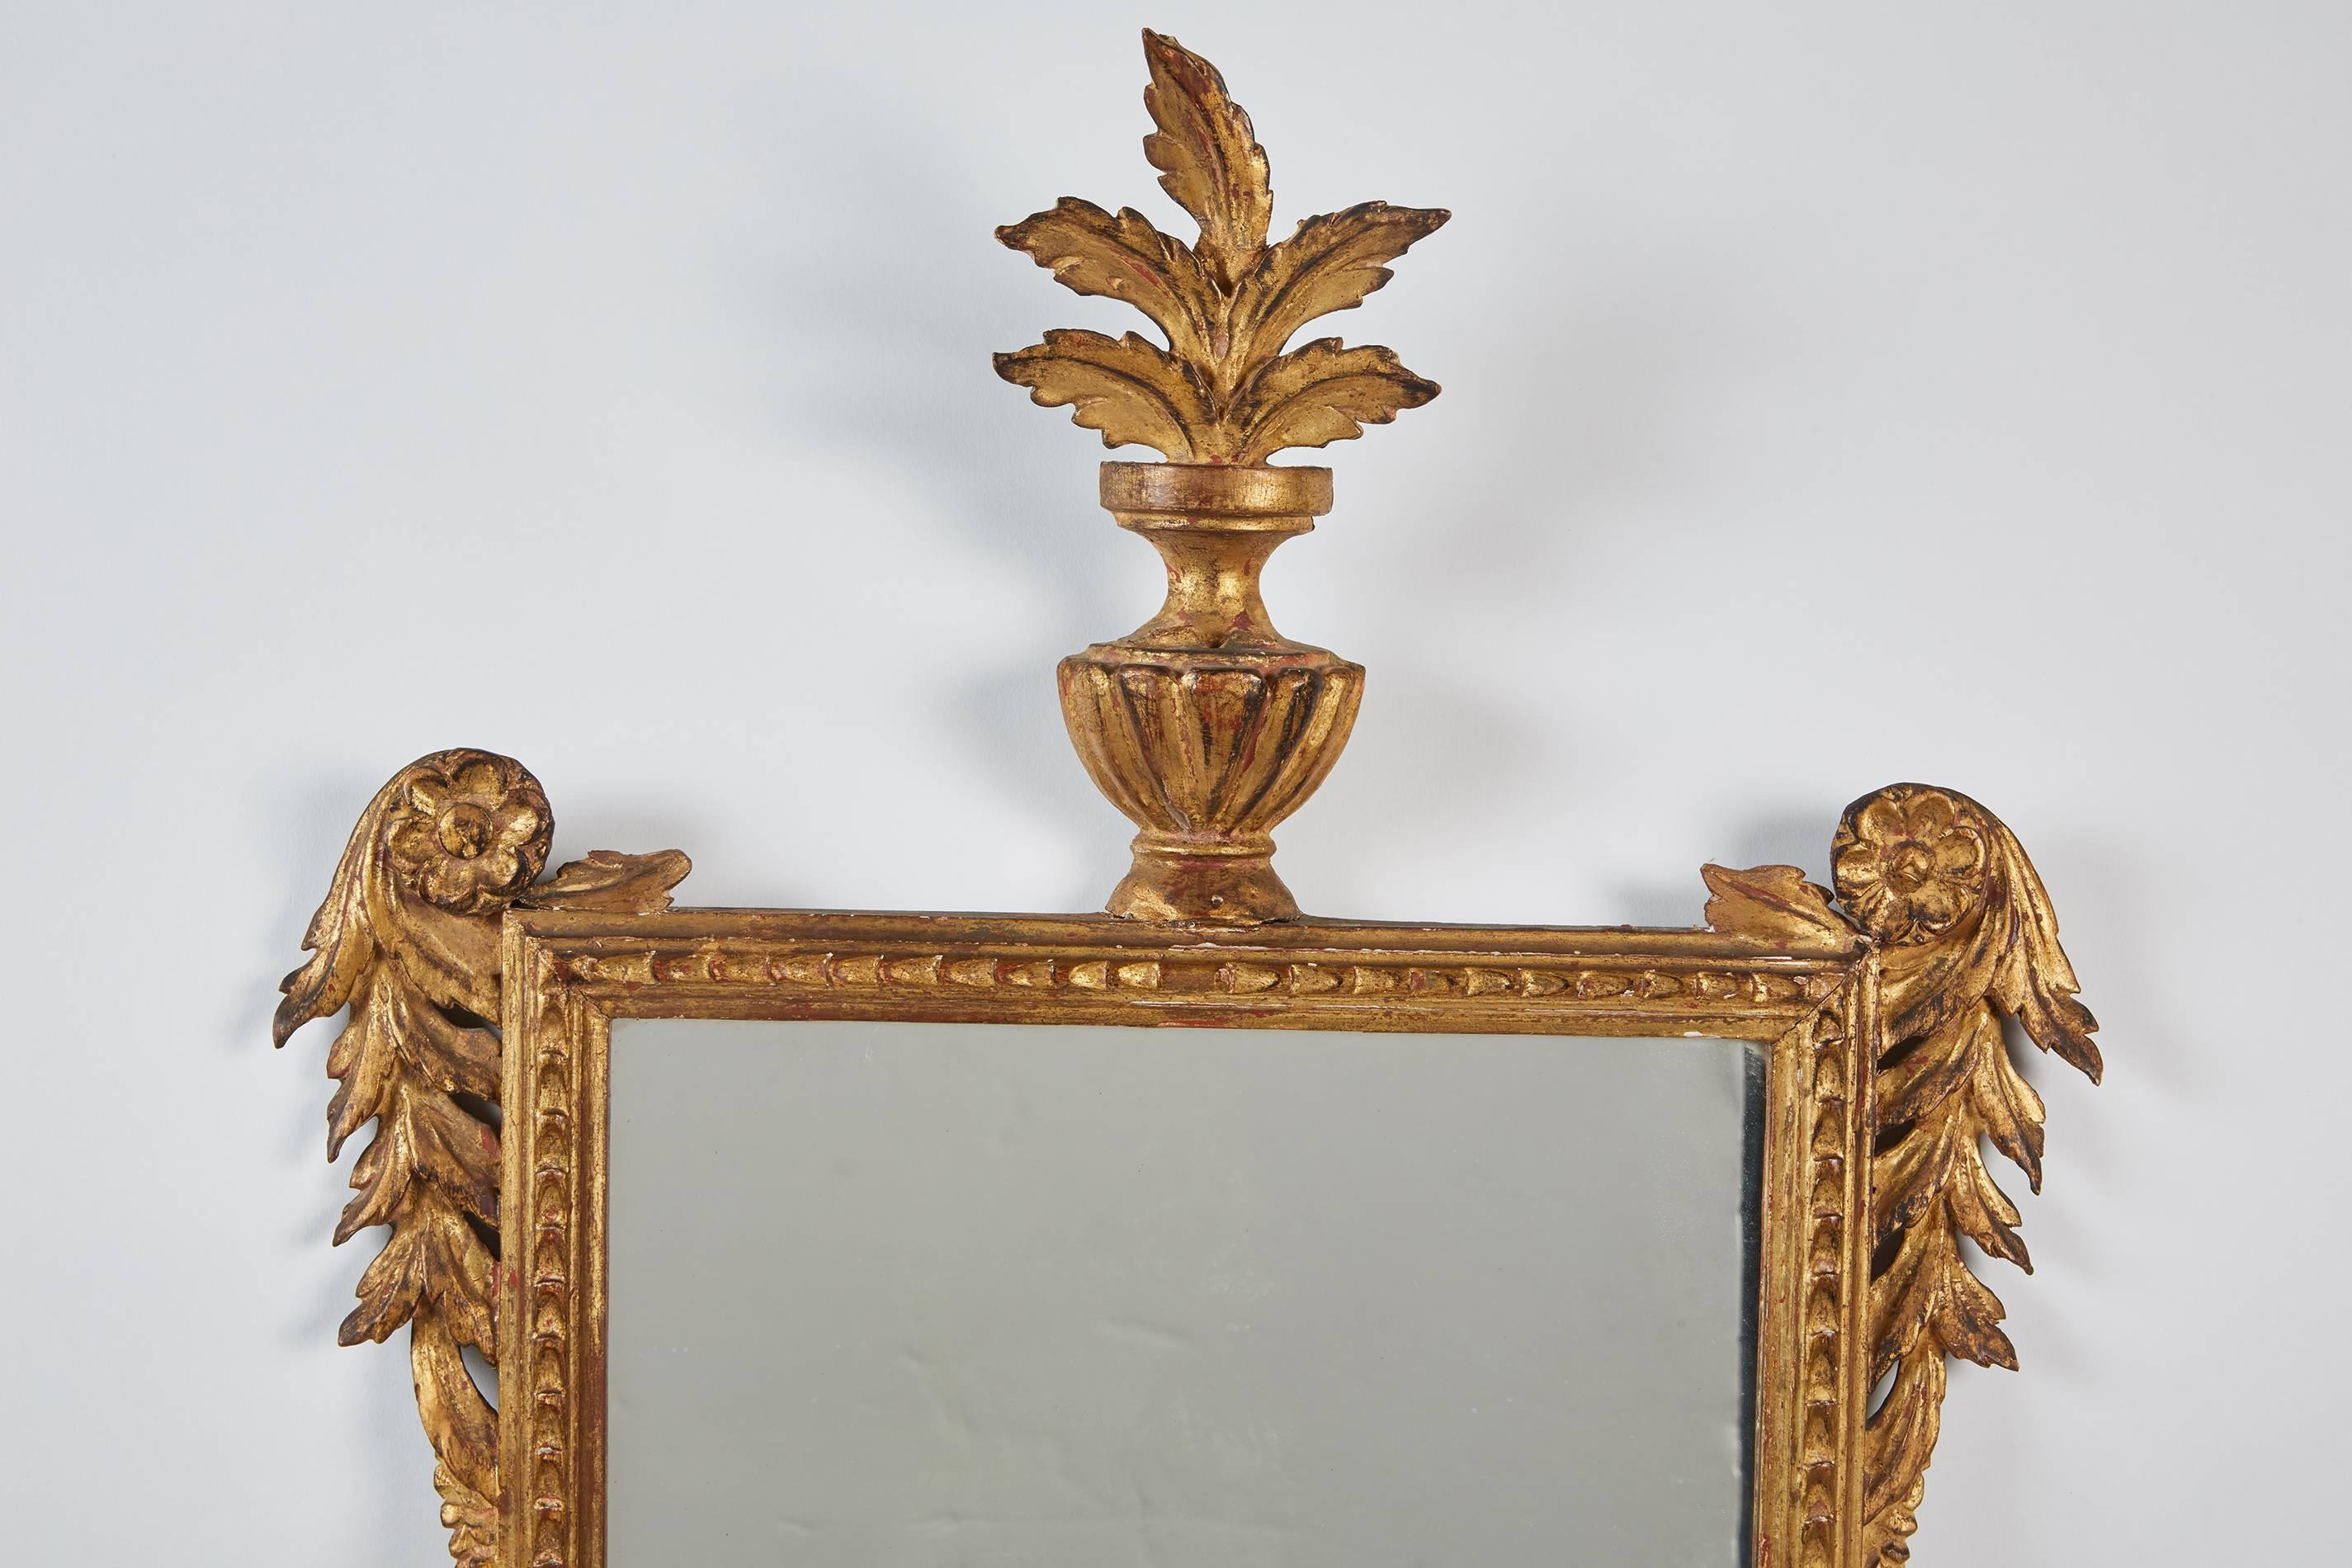 An 18th century French Regency gilt mirror featuring beautifully carved flowers and acanthus leaves draping along the side of the rectilinear frame, the mirror also consists of a Classic urn crest sitting at the top.